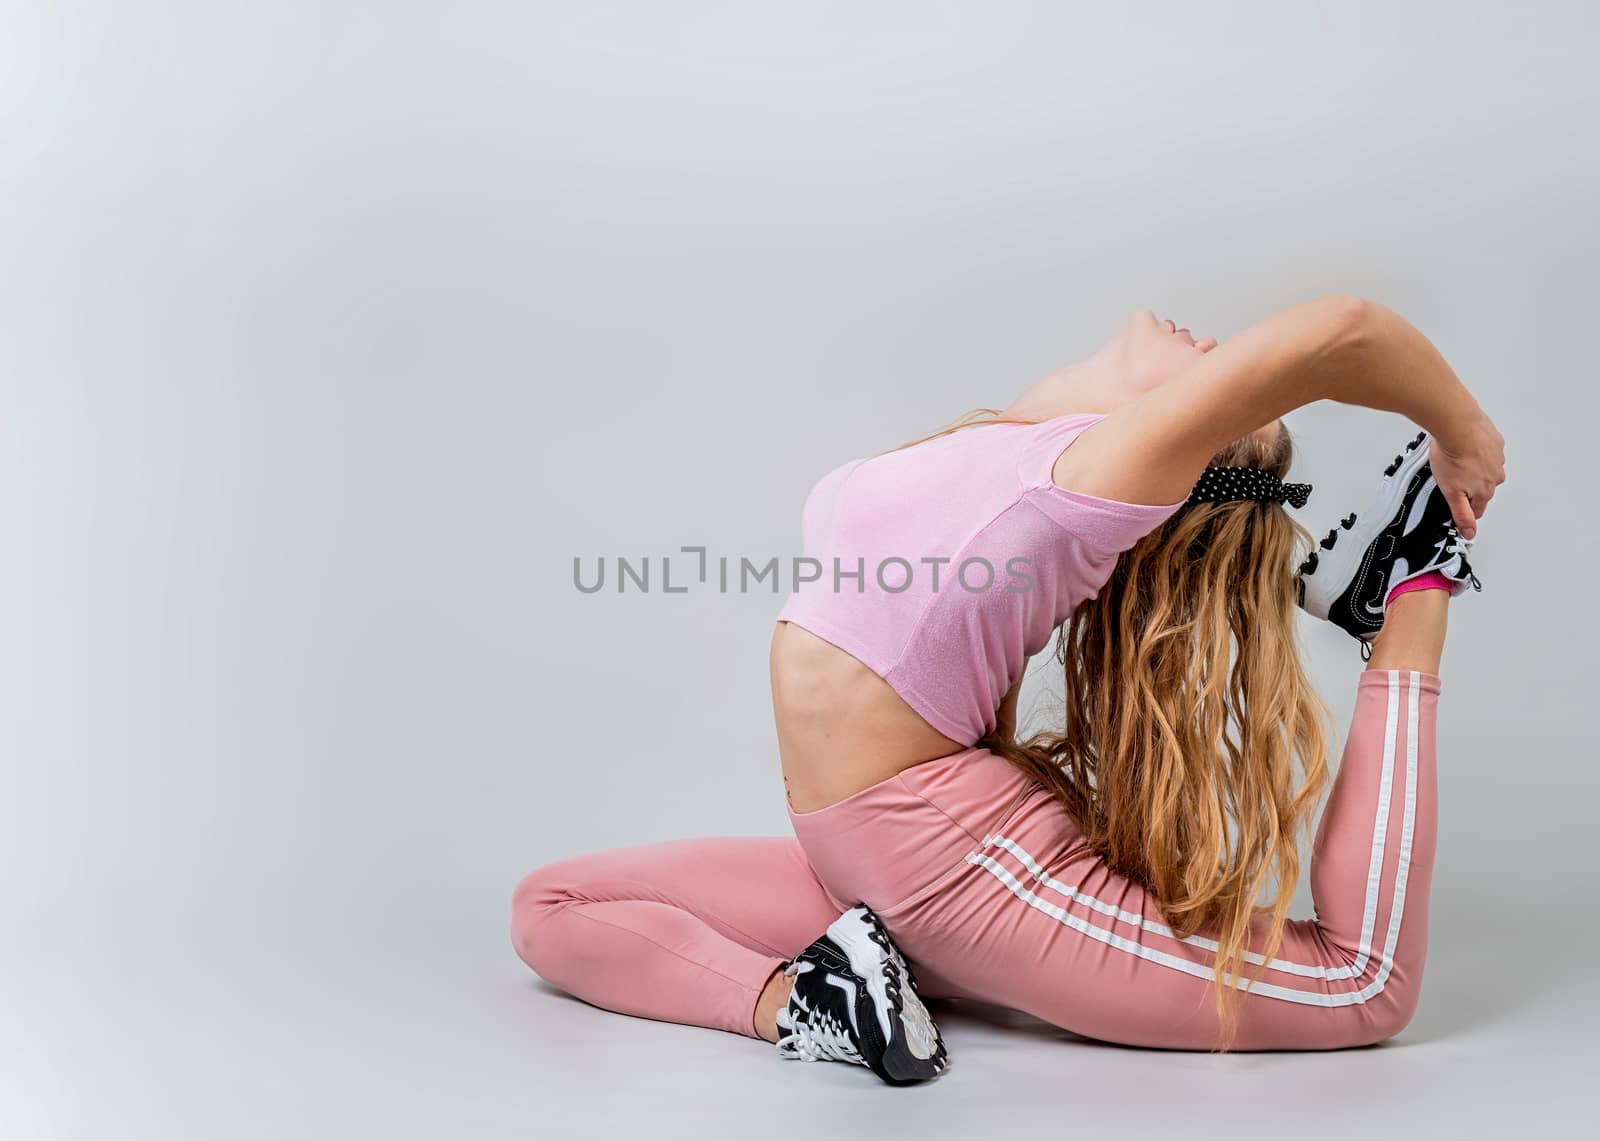 Fitness, sport, training and lifestyle concept. Athletic acrobat woman wearing pink sportswear doing yoga in the studio isolated on gray background